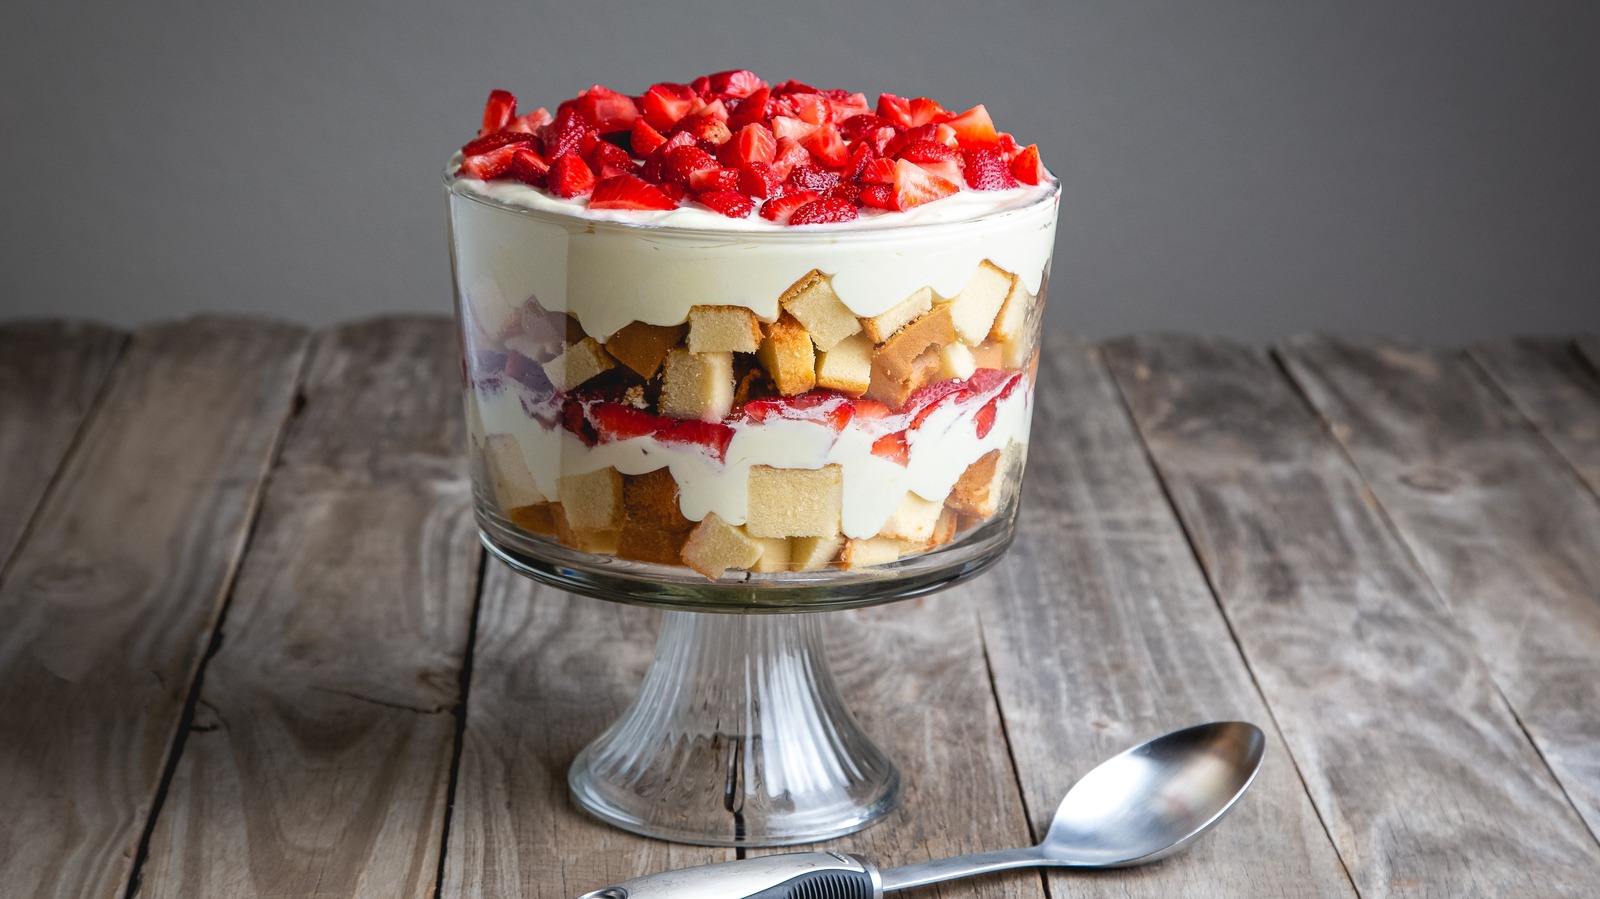 https://www.thedailymeal.com/img/gallery/turn-your-crumbled-cake-disaster-into-adorable-mini-trifles/l-intro-1697902803.jpg